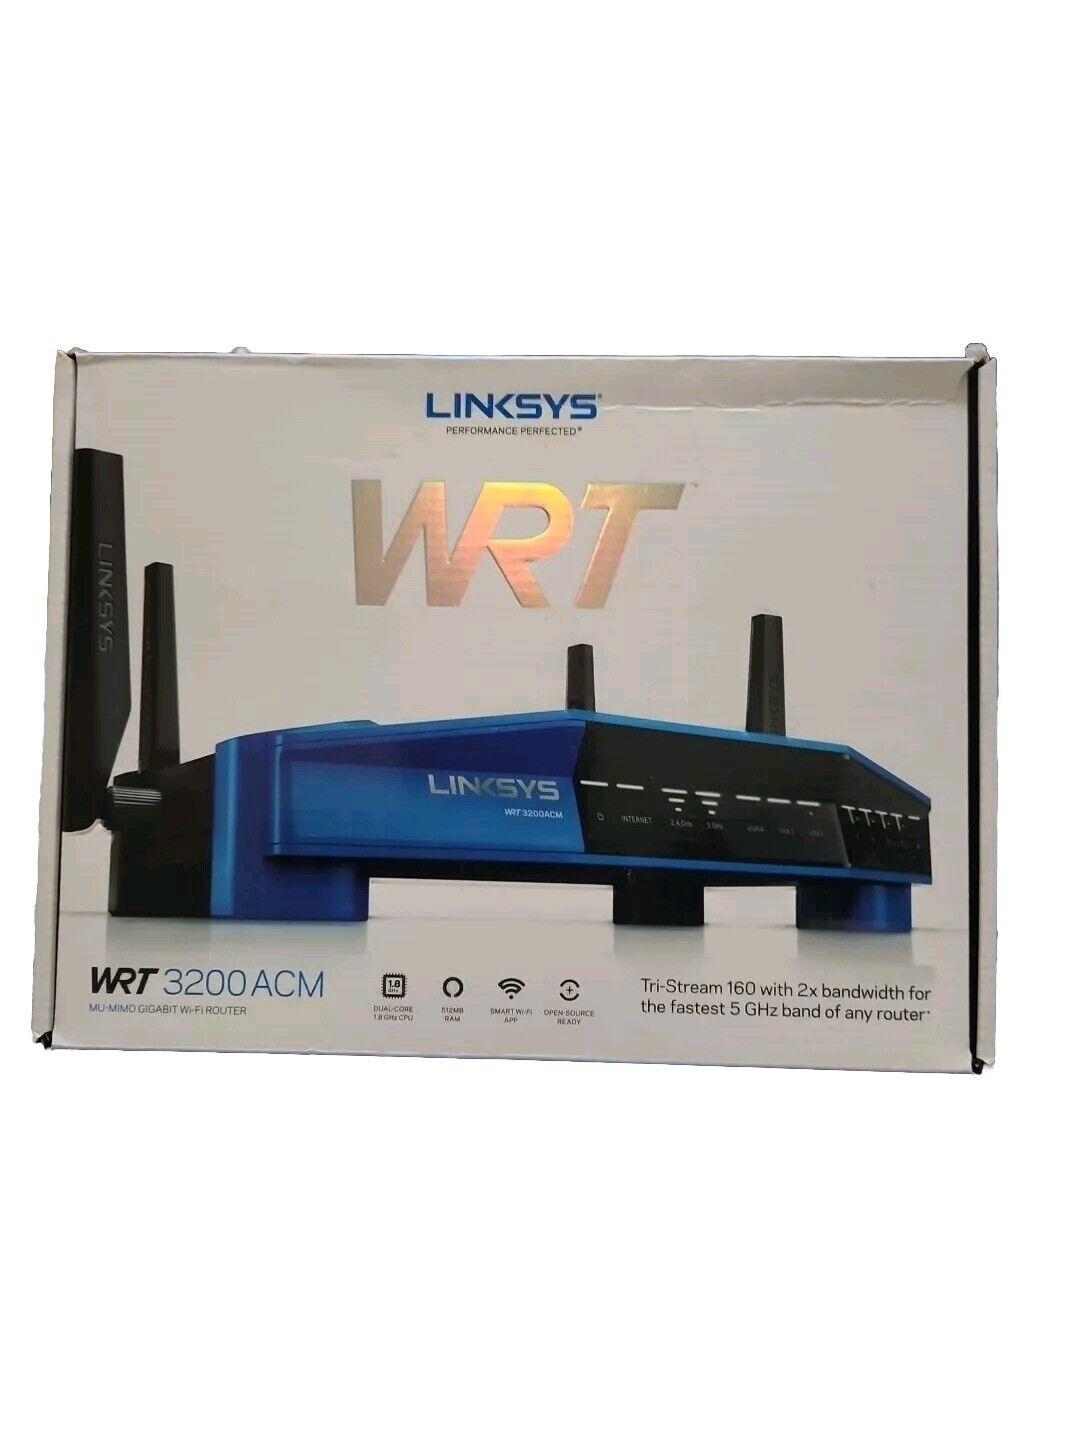 New Open Box Linksys WRT3200ACM Dual-Band Wi-Fi Router